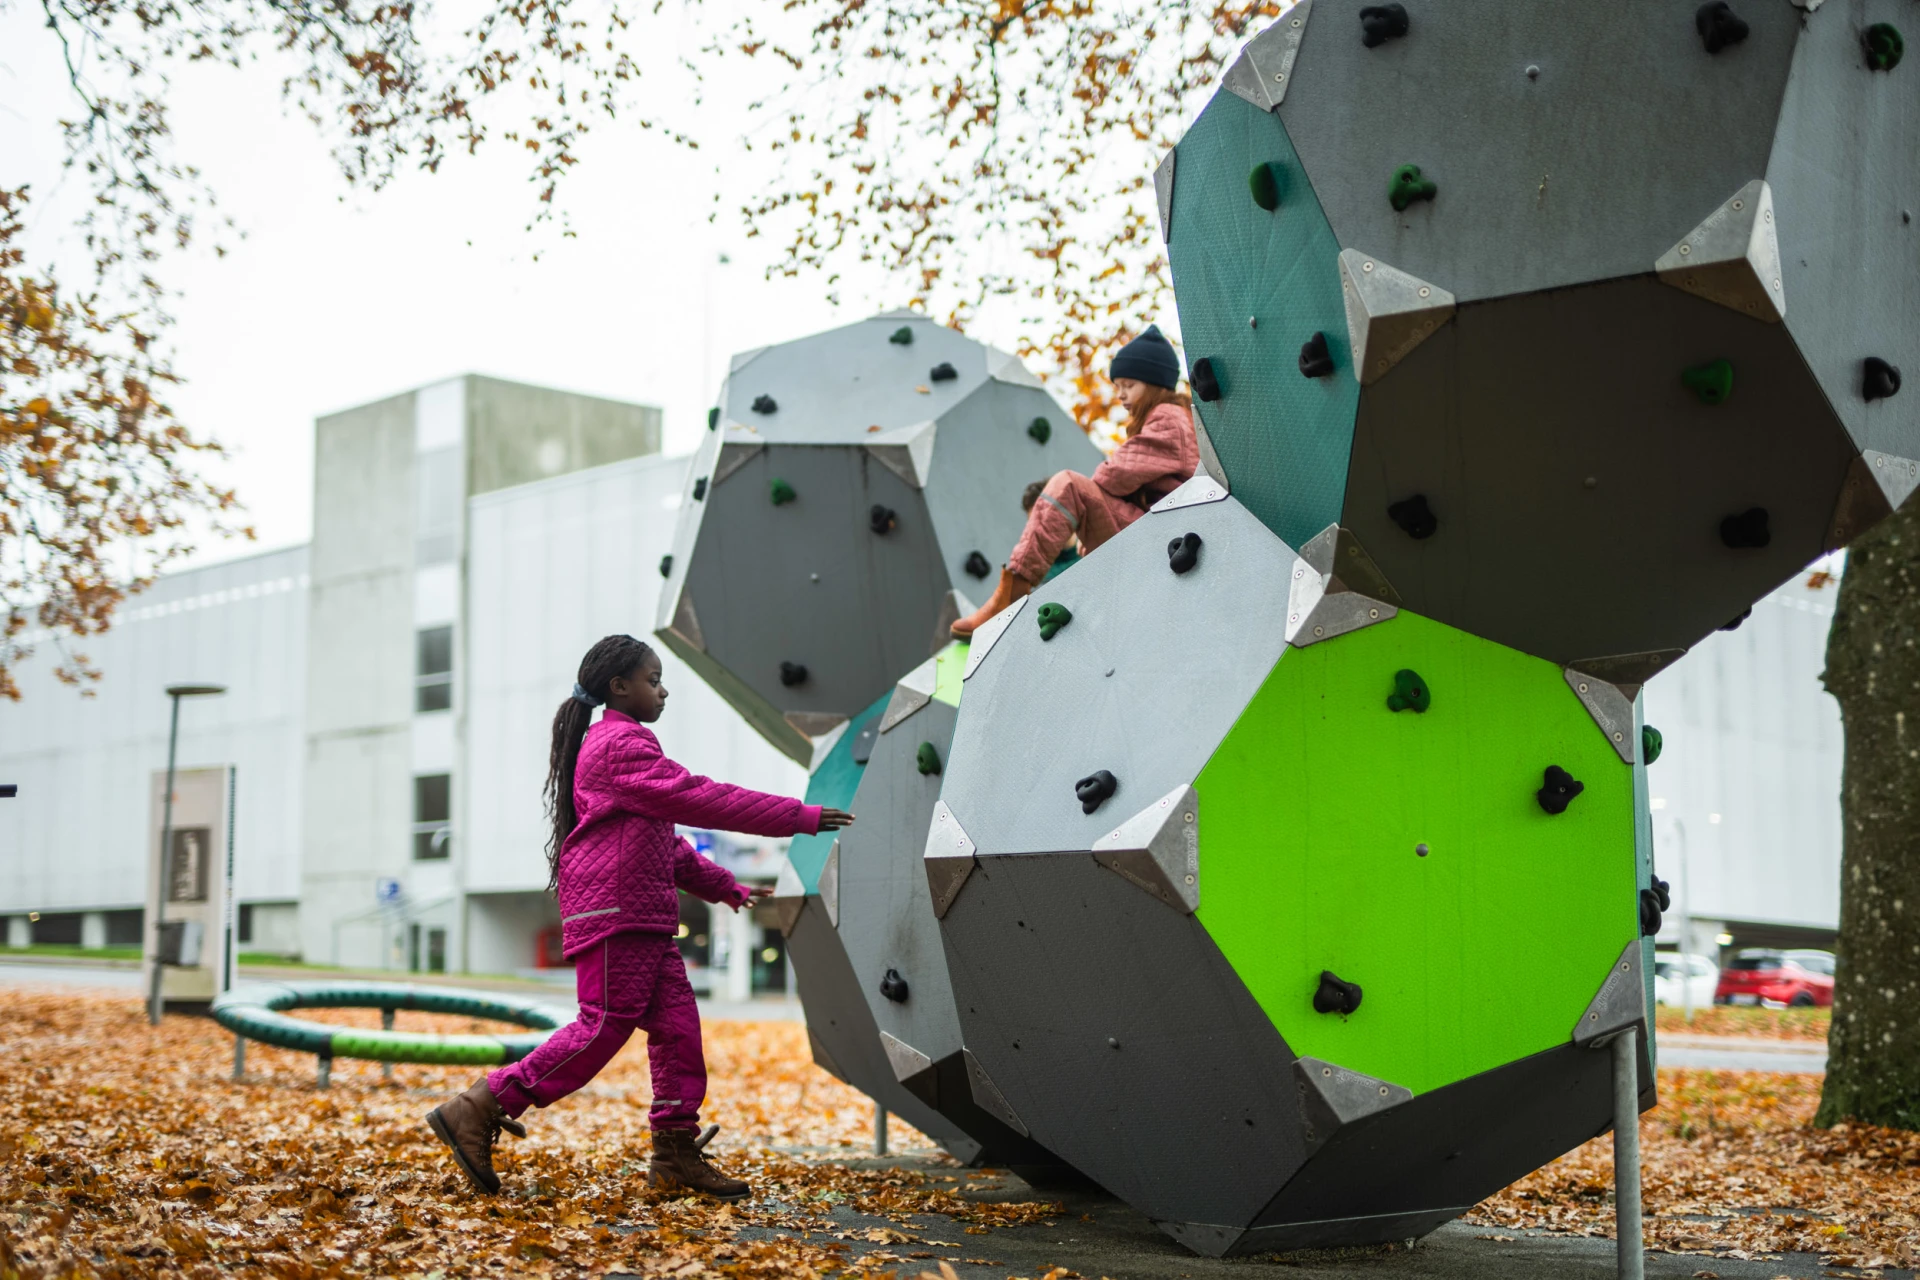 Girls playing on a large playground climbing structure